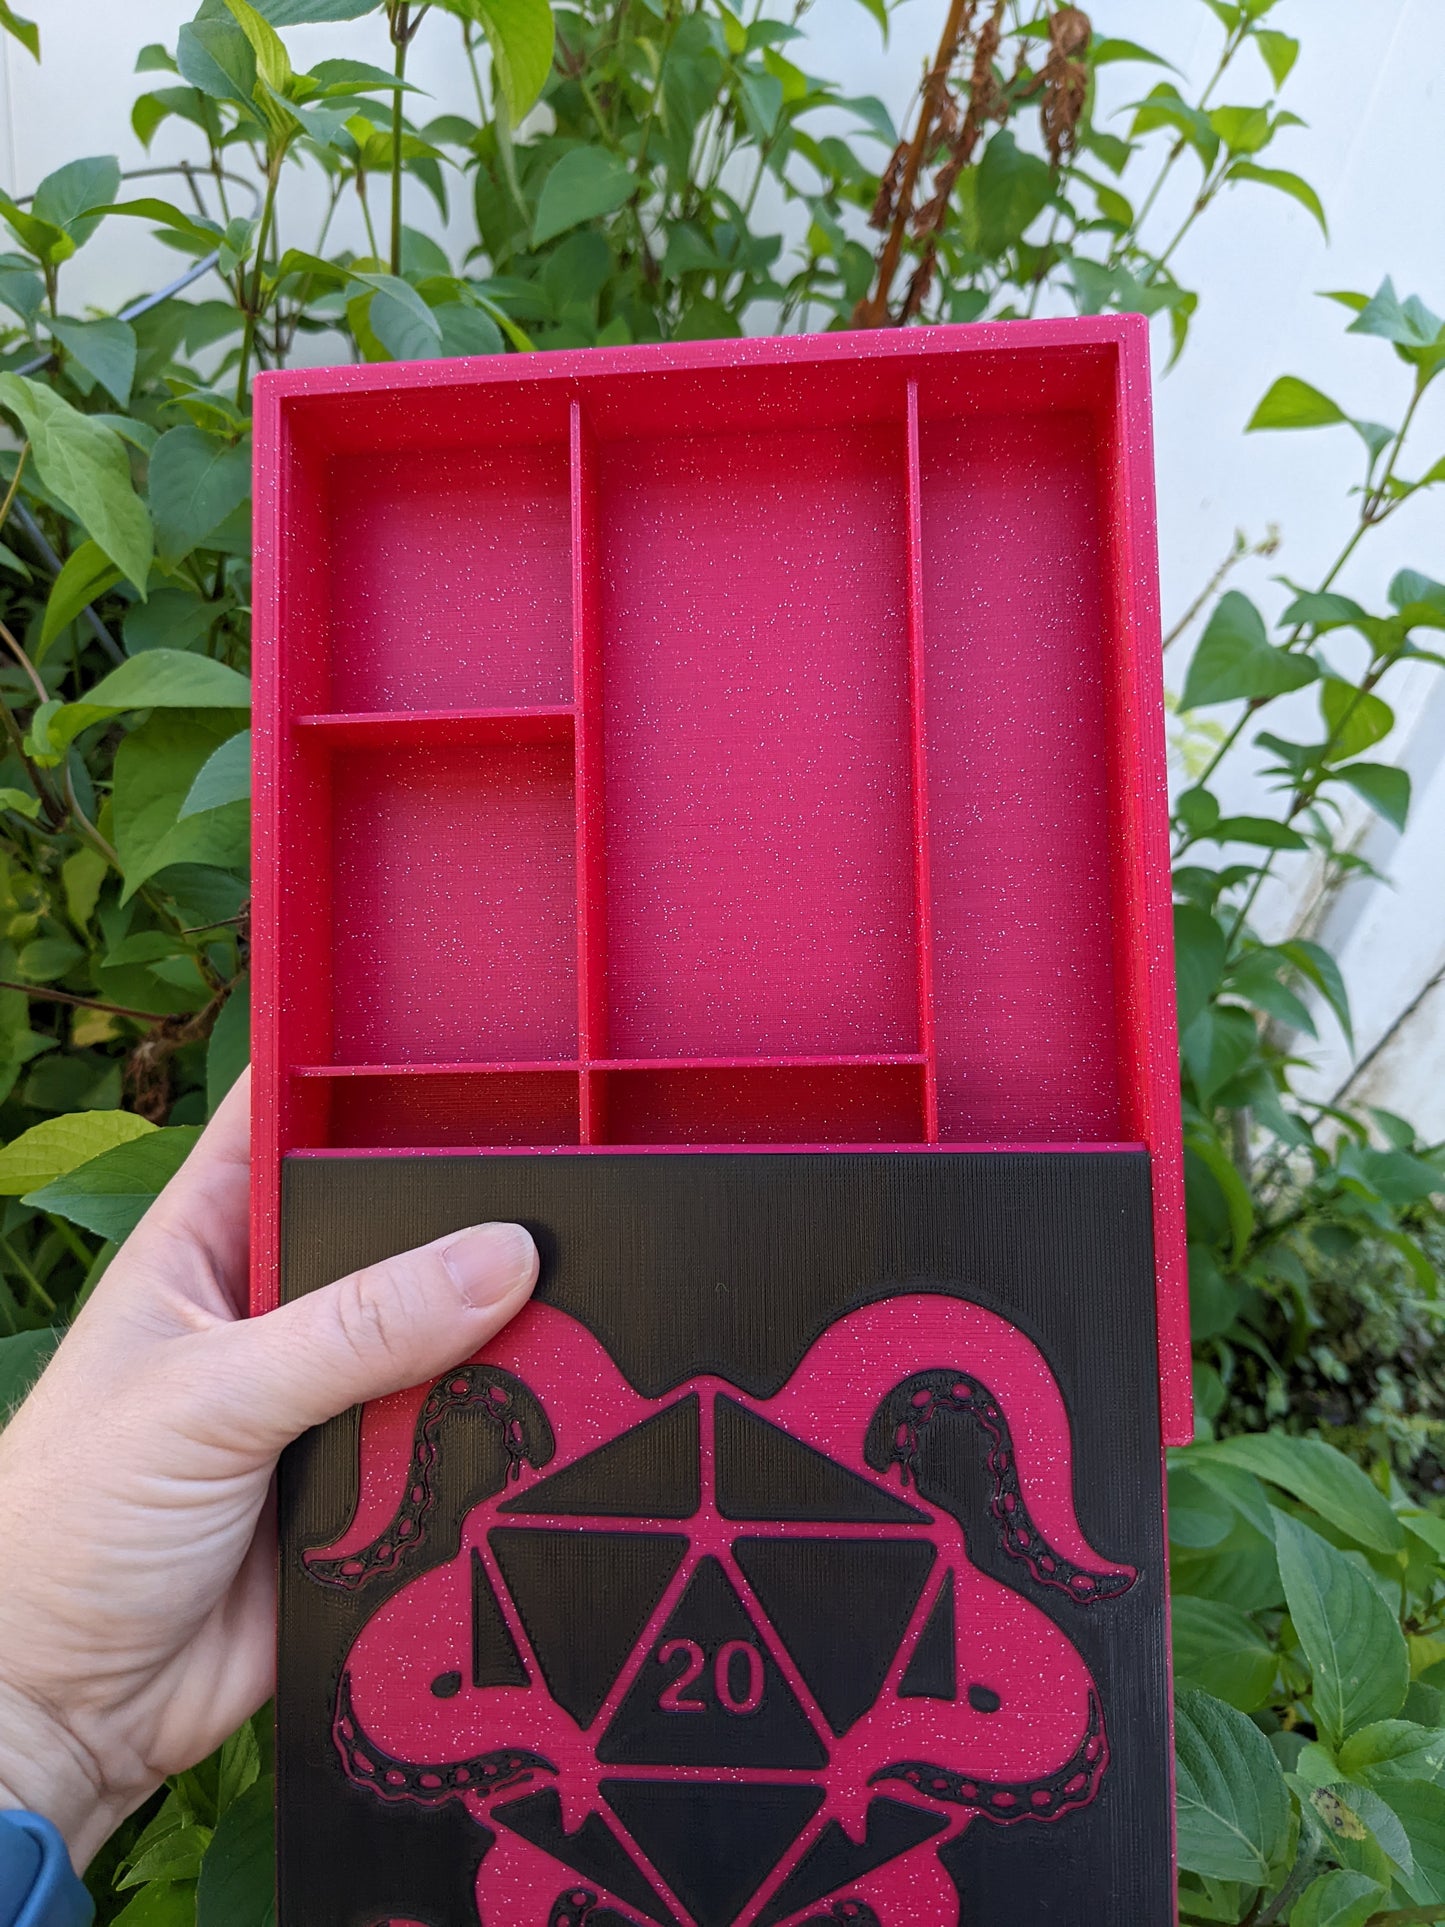 3D printed Notions Box--Tentacle D20